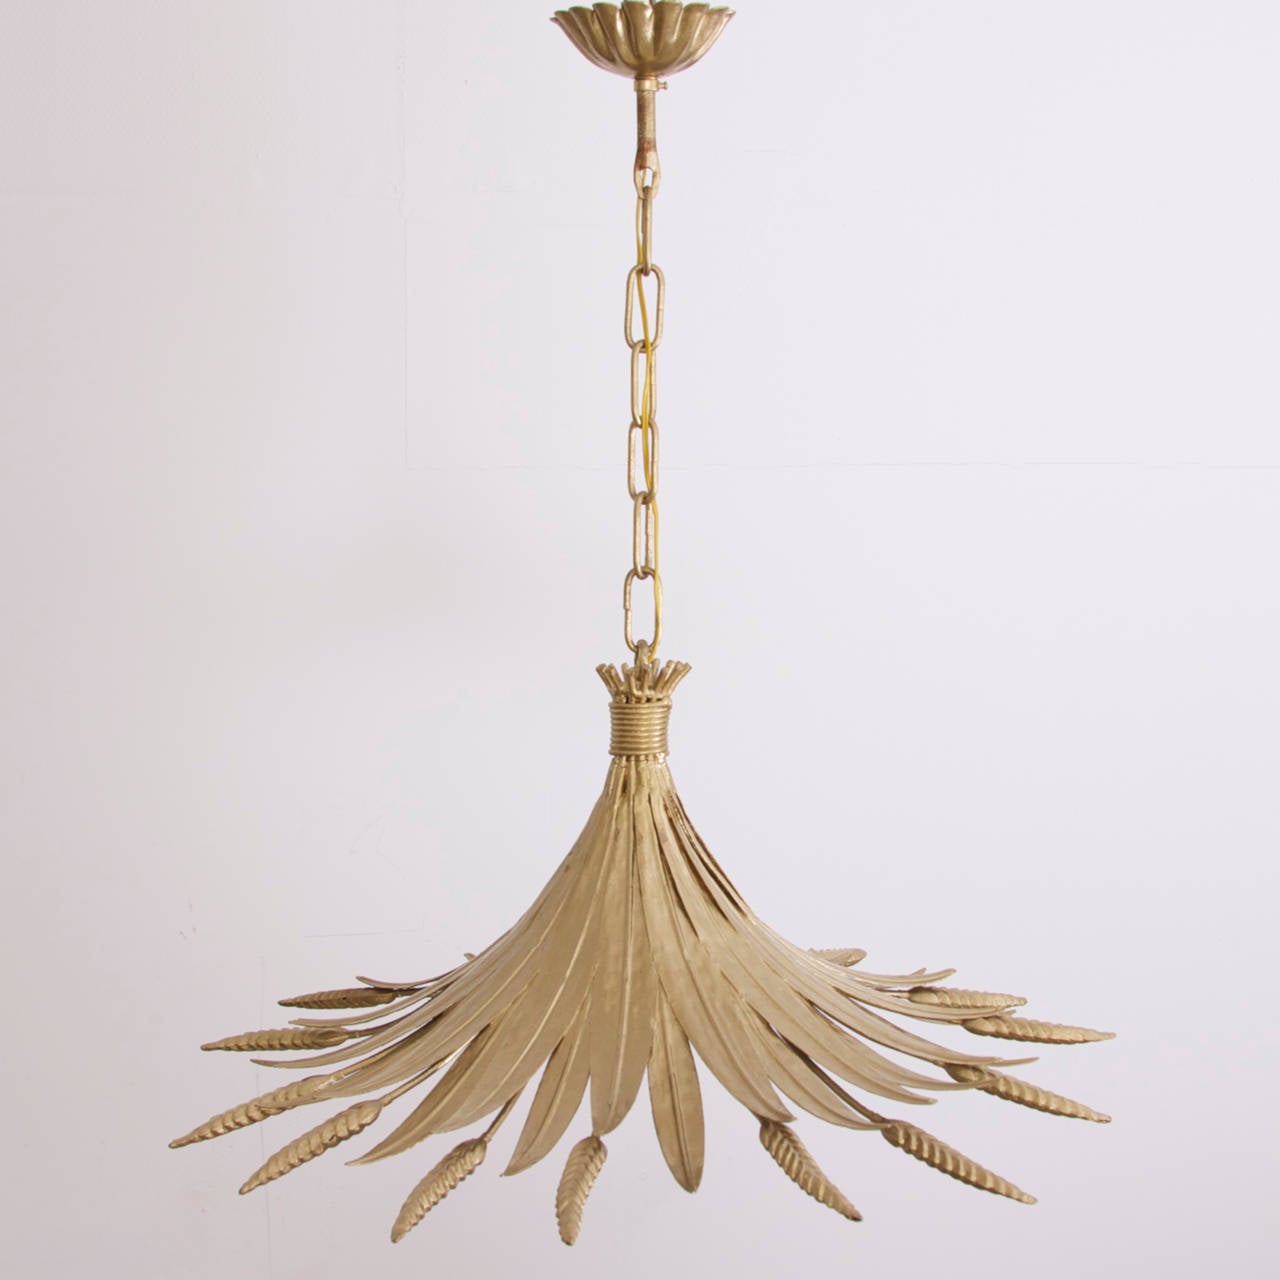 Wonderful Coco Chanel Style Pendant lamp fitting perfect to the Coco Chanel Sheaf of Wheat Table.

Shade height is 30 cm